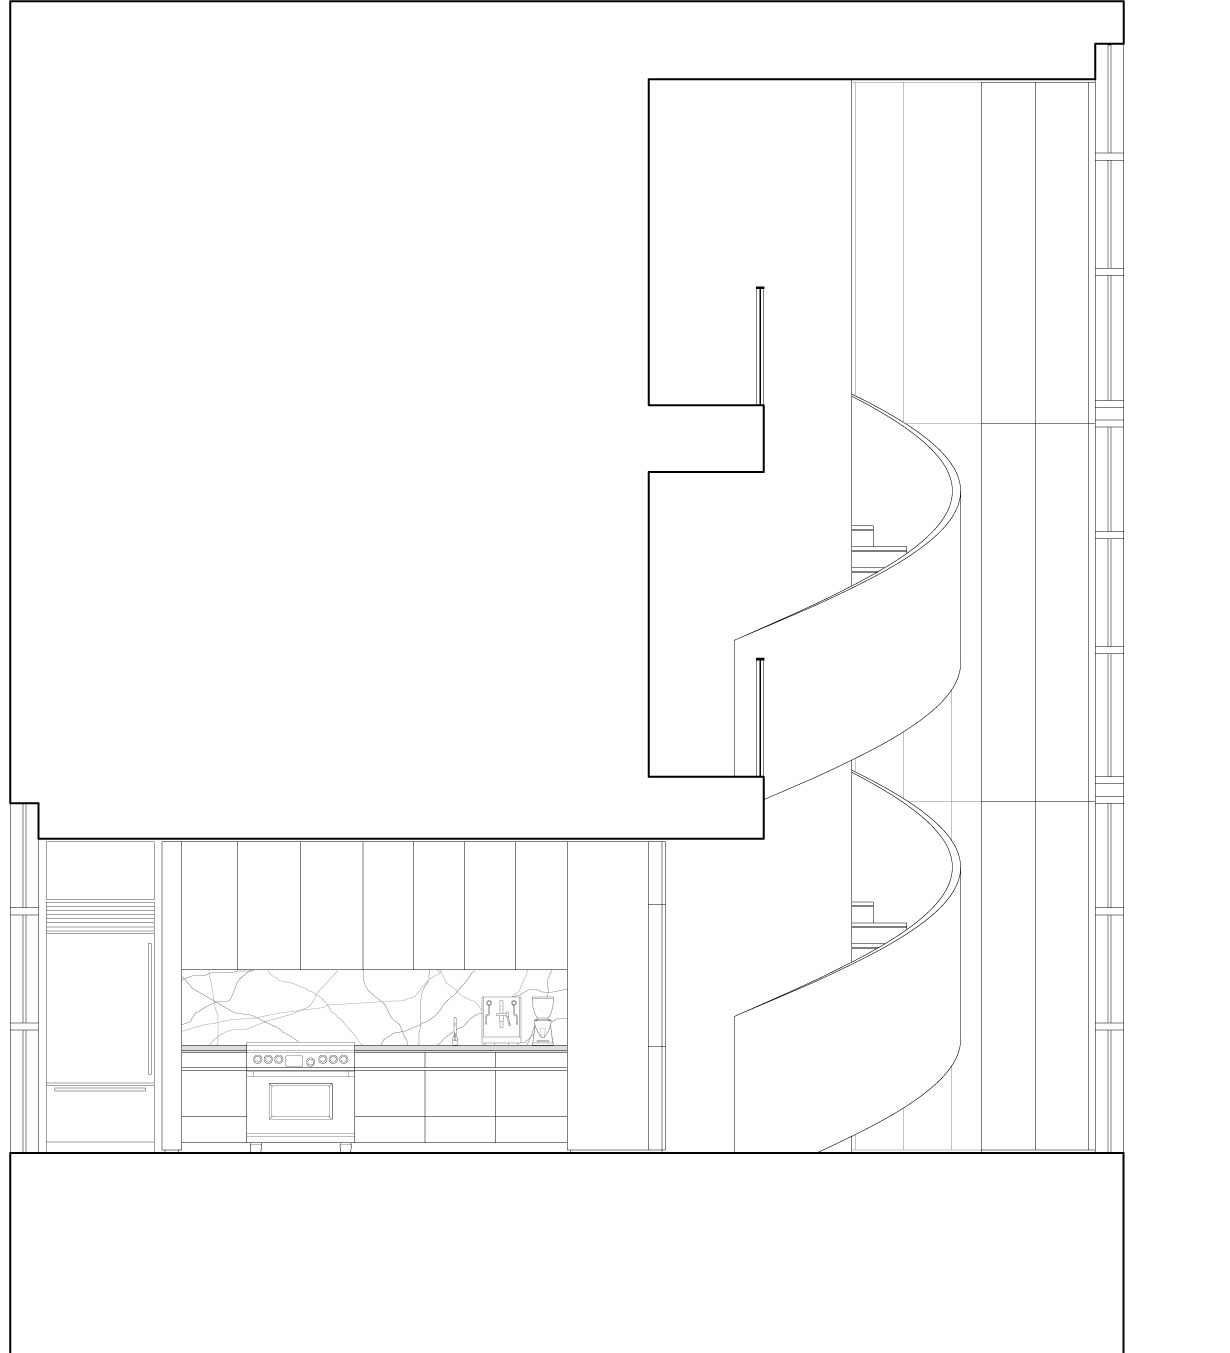 A section drawing shows the void space with corkscrew stair.